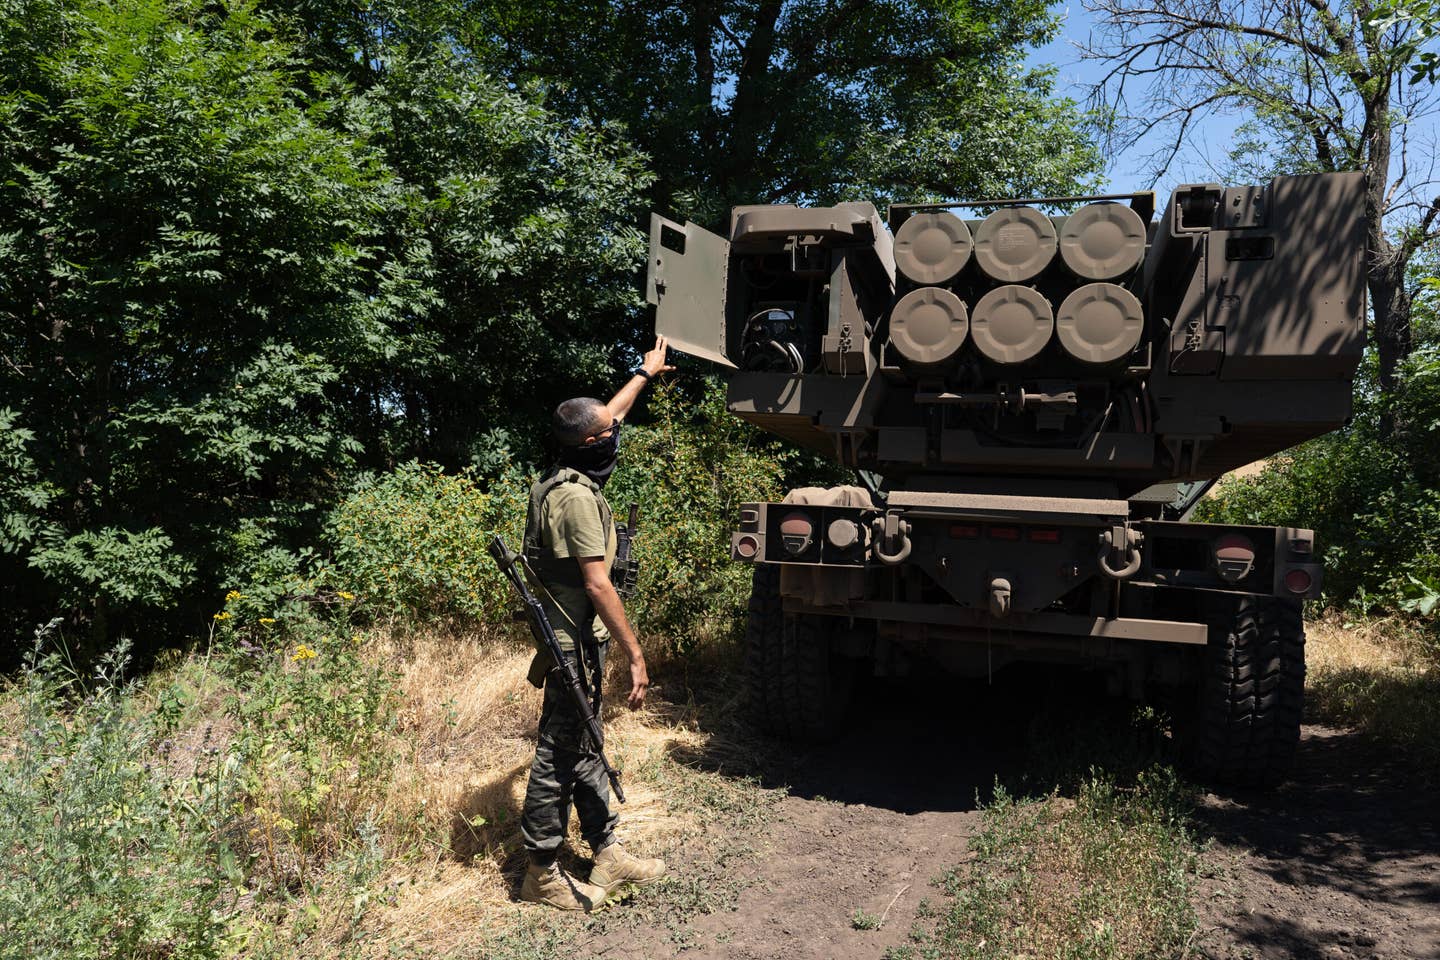 A Ukrainian commander shows Guided Multiple Launch Rocket System (GMLRS) rockets on a M142 High Mobility Artillery Rocket Systems (HIMARS) vehicle in Eastern Ukraine on July 1, 2022.  (Photo by Anastasia Vlasova for The Washington Post via Getty Images)